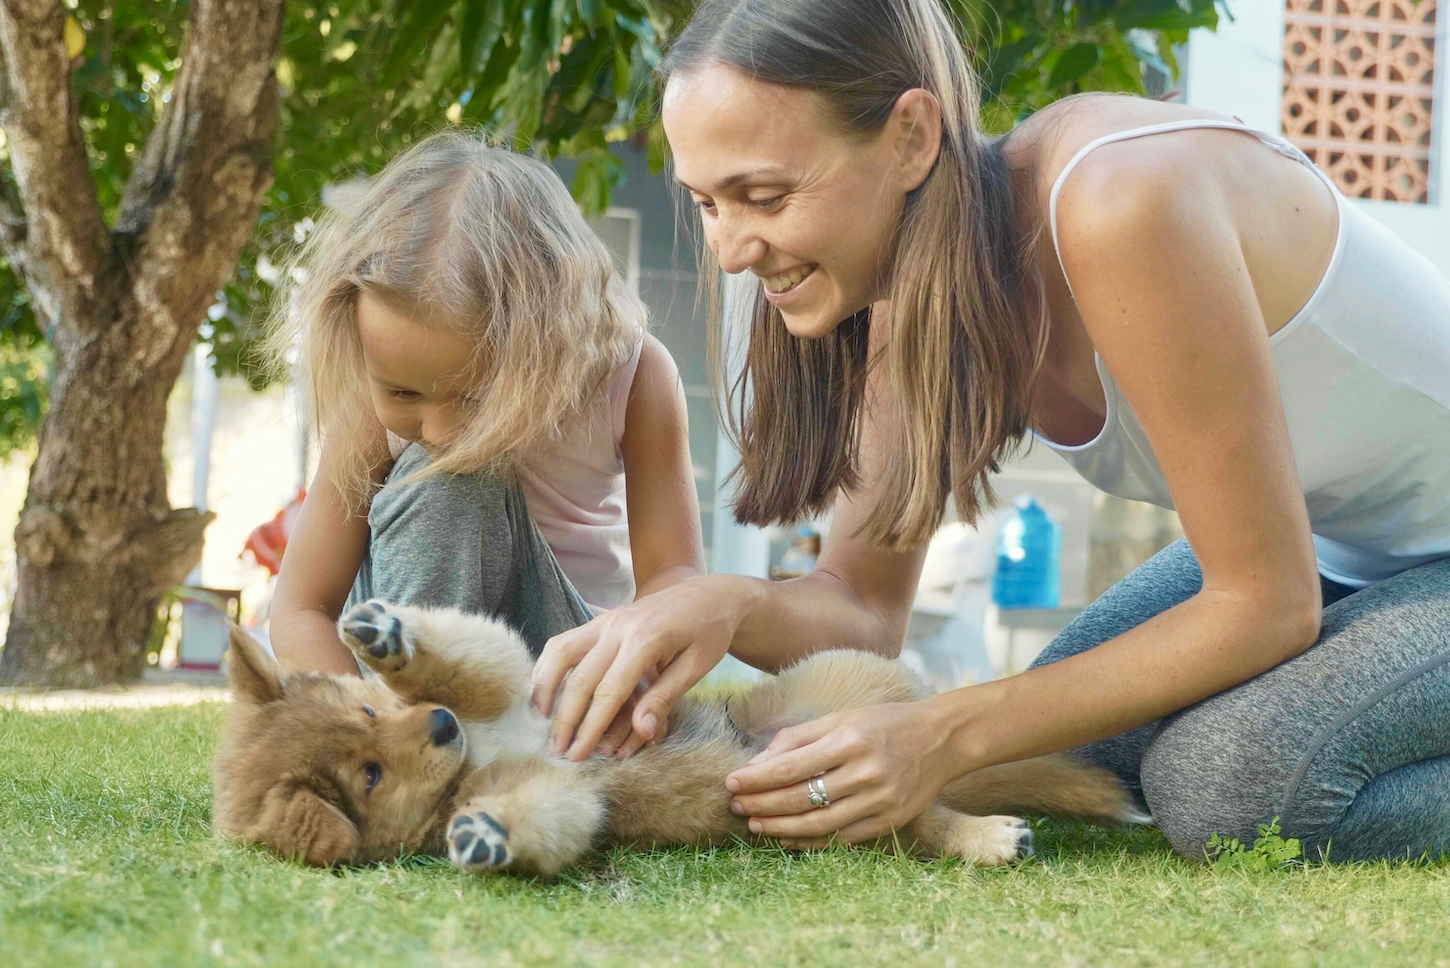 A Comprehensive Guide to Getting a Puppy: What to Consider and Purchase